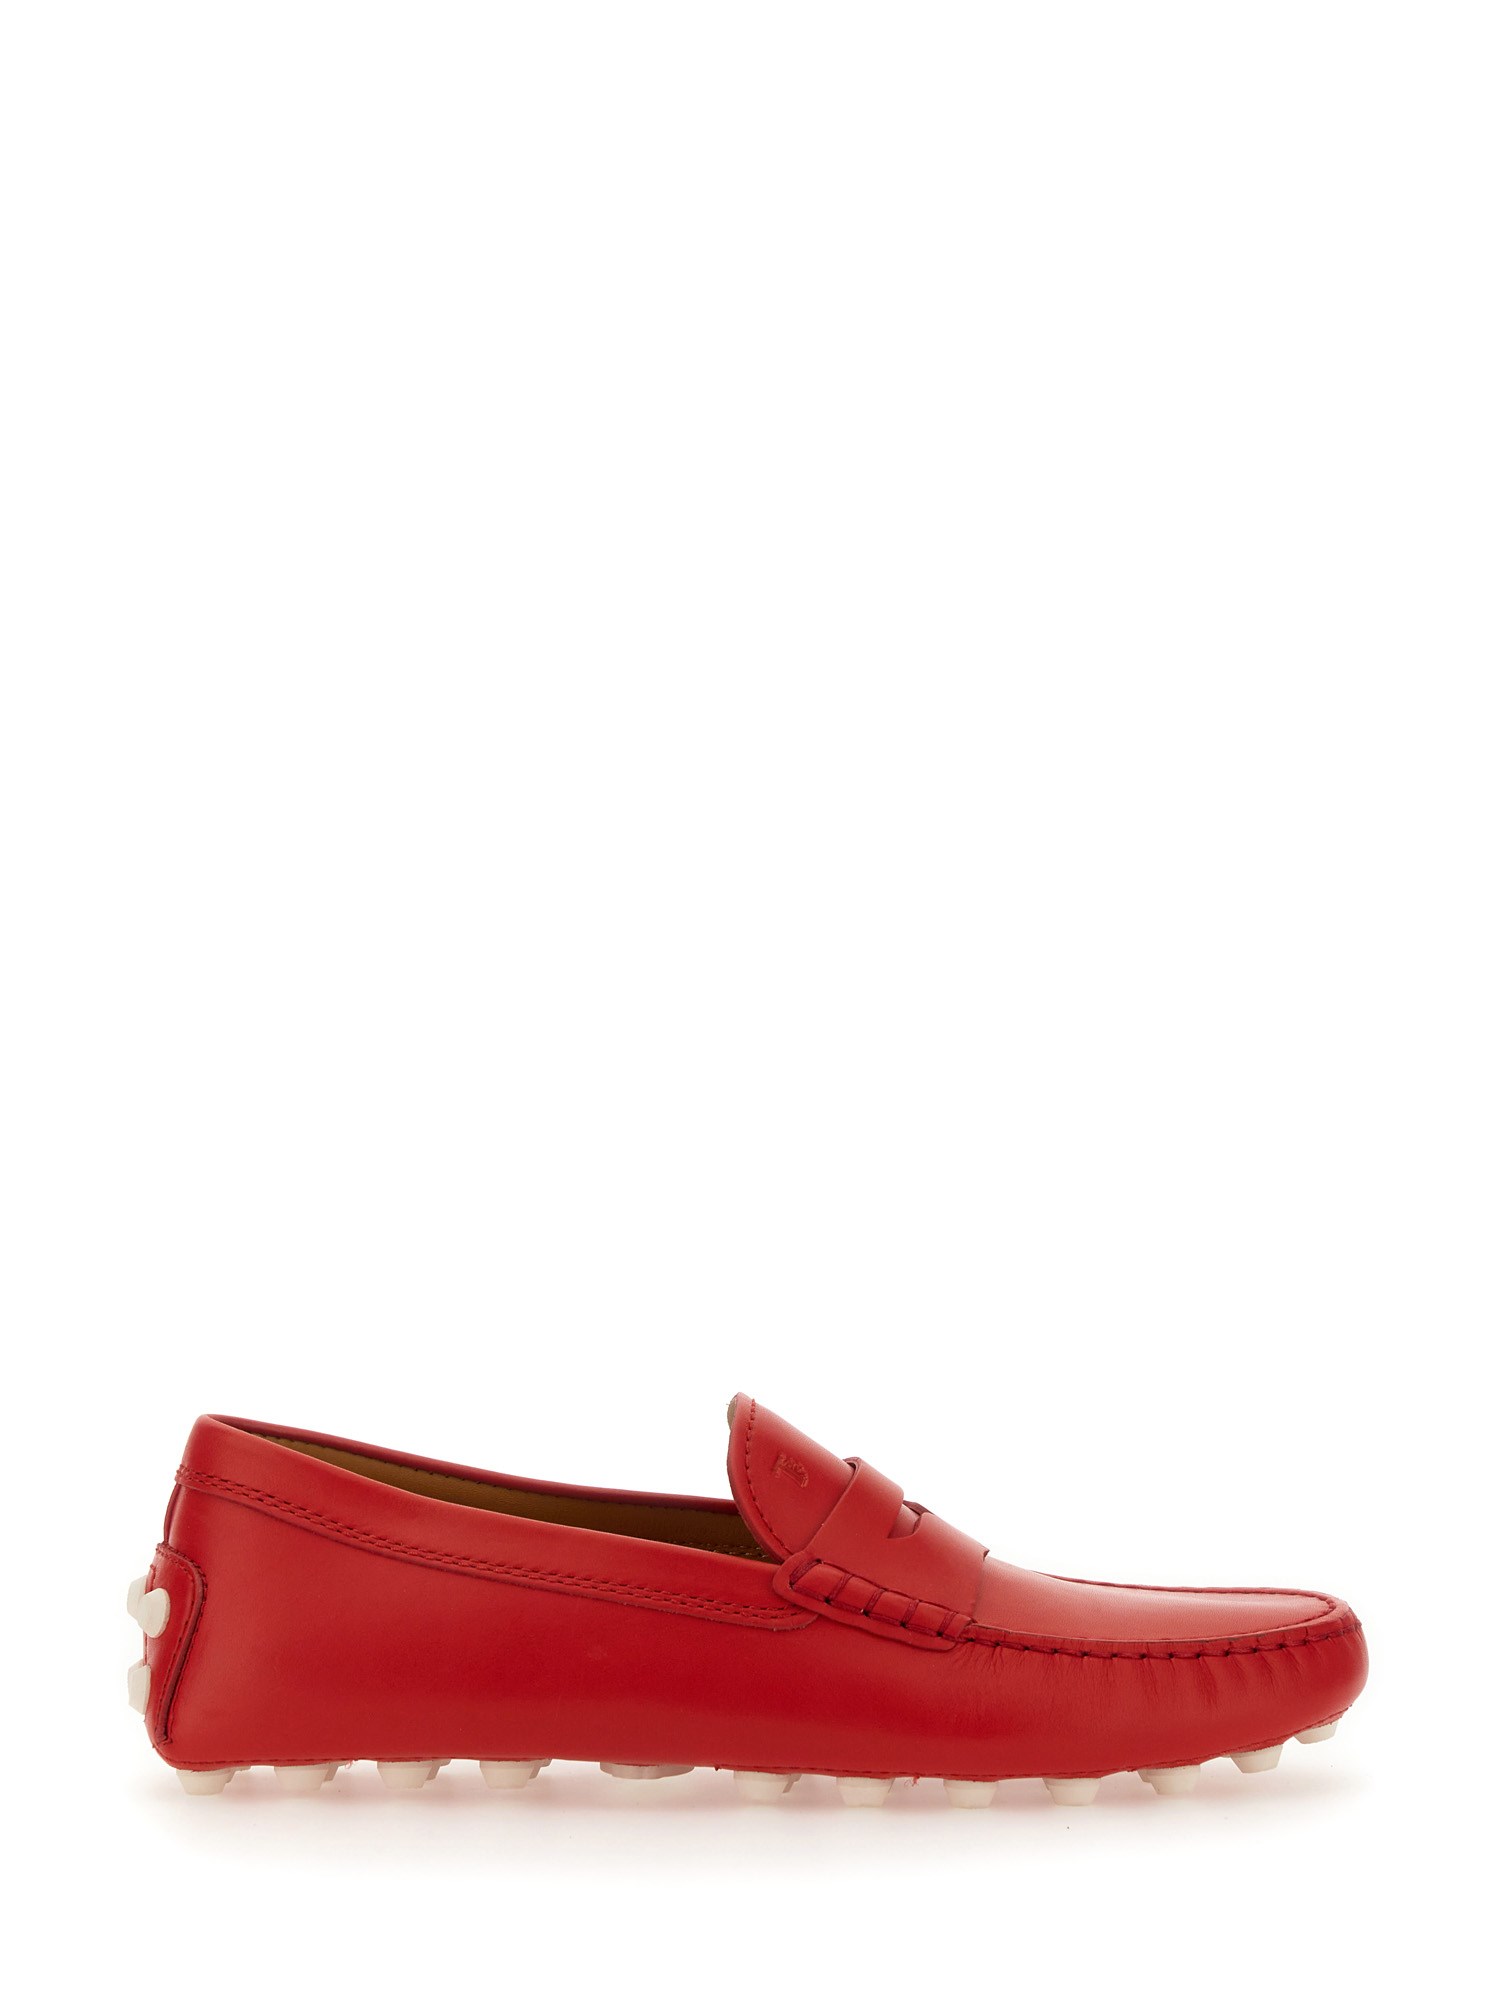 tod's rubberized moccasin